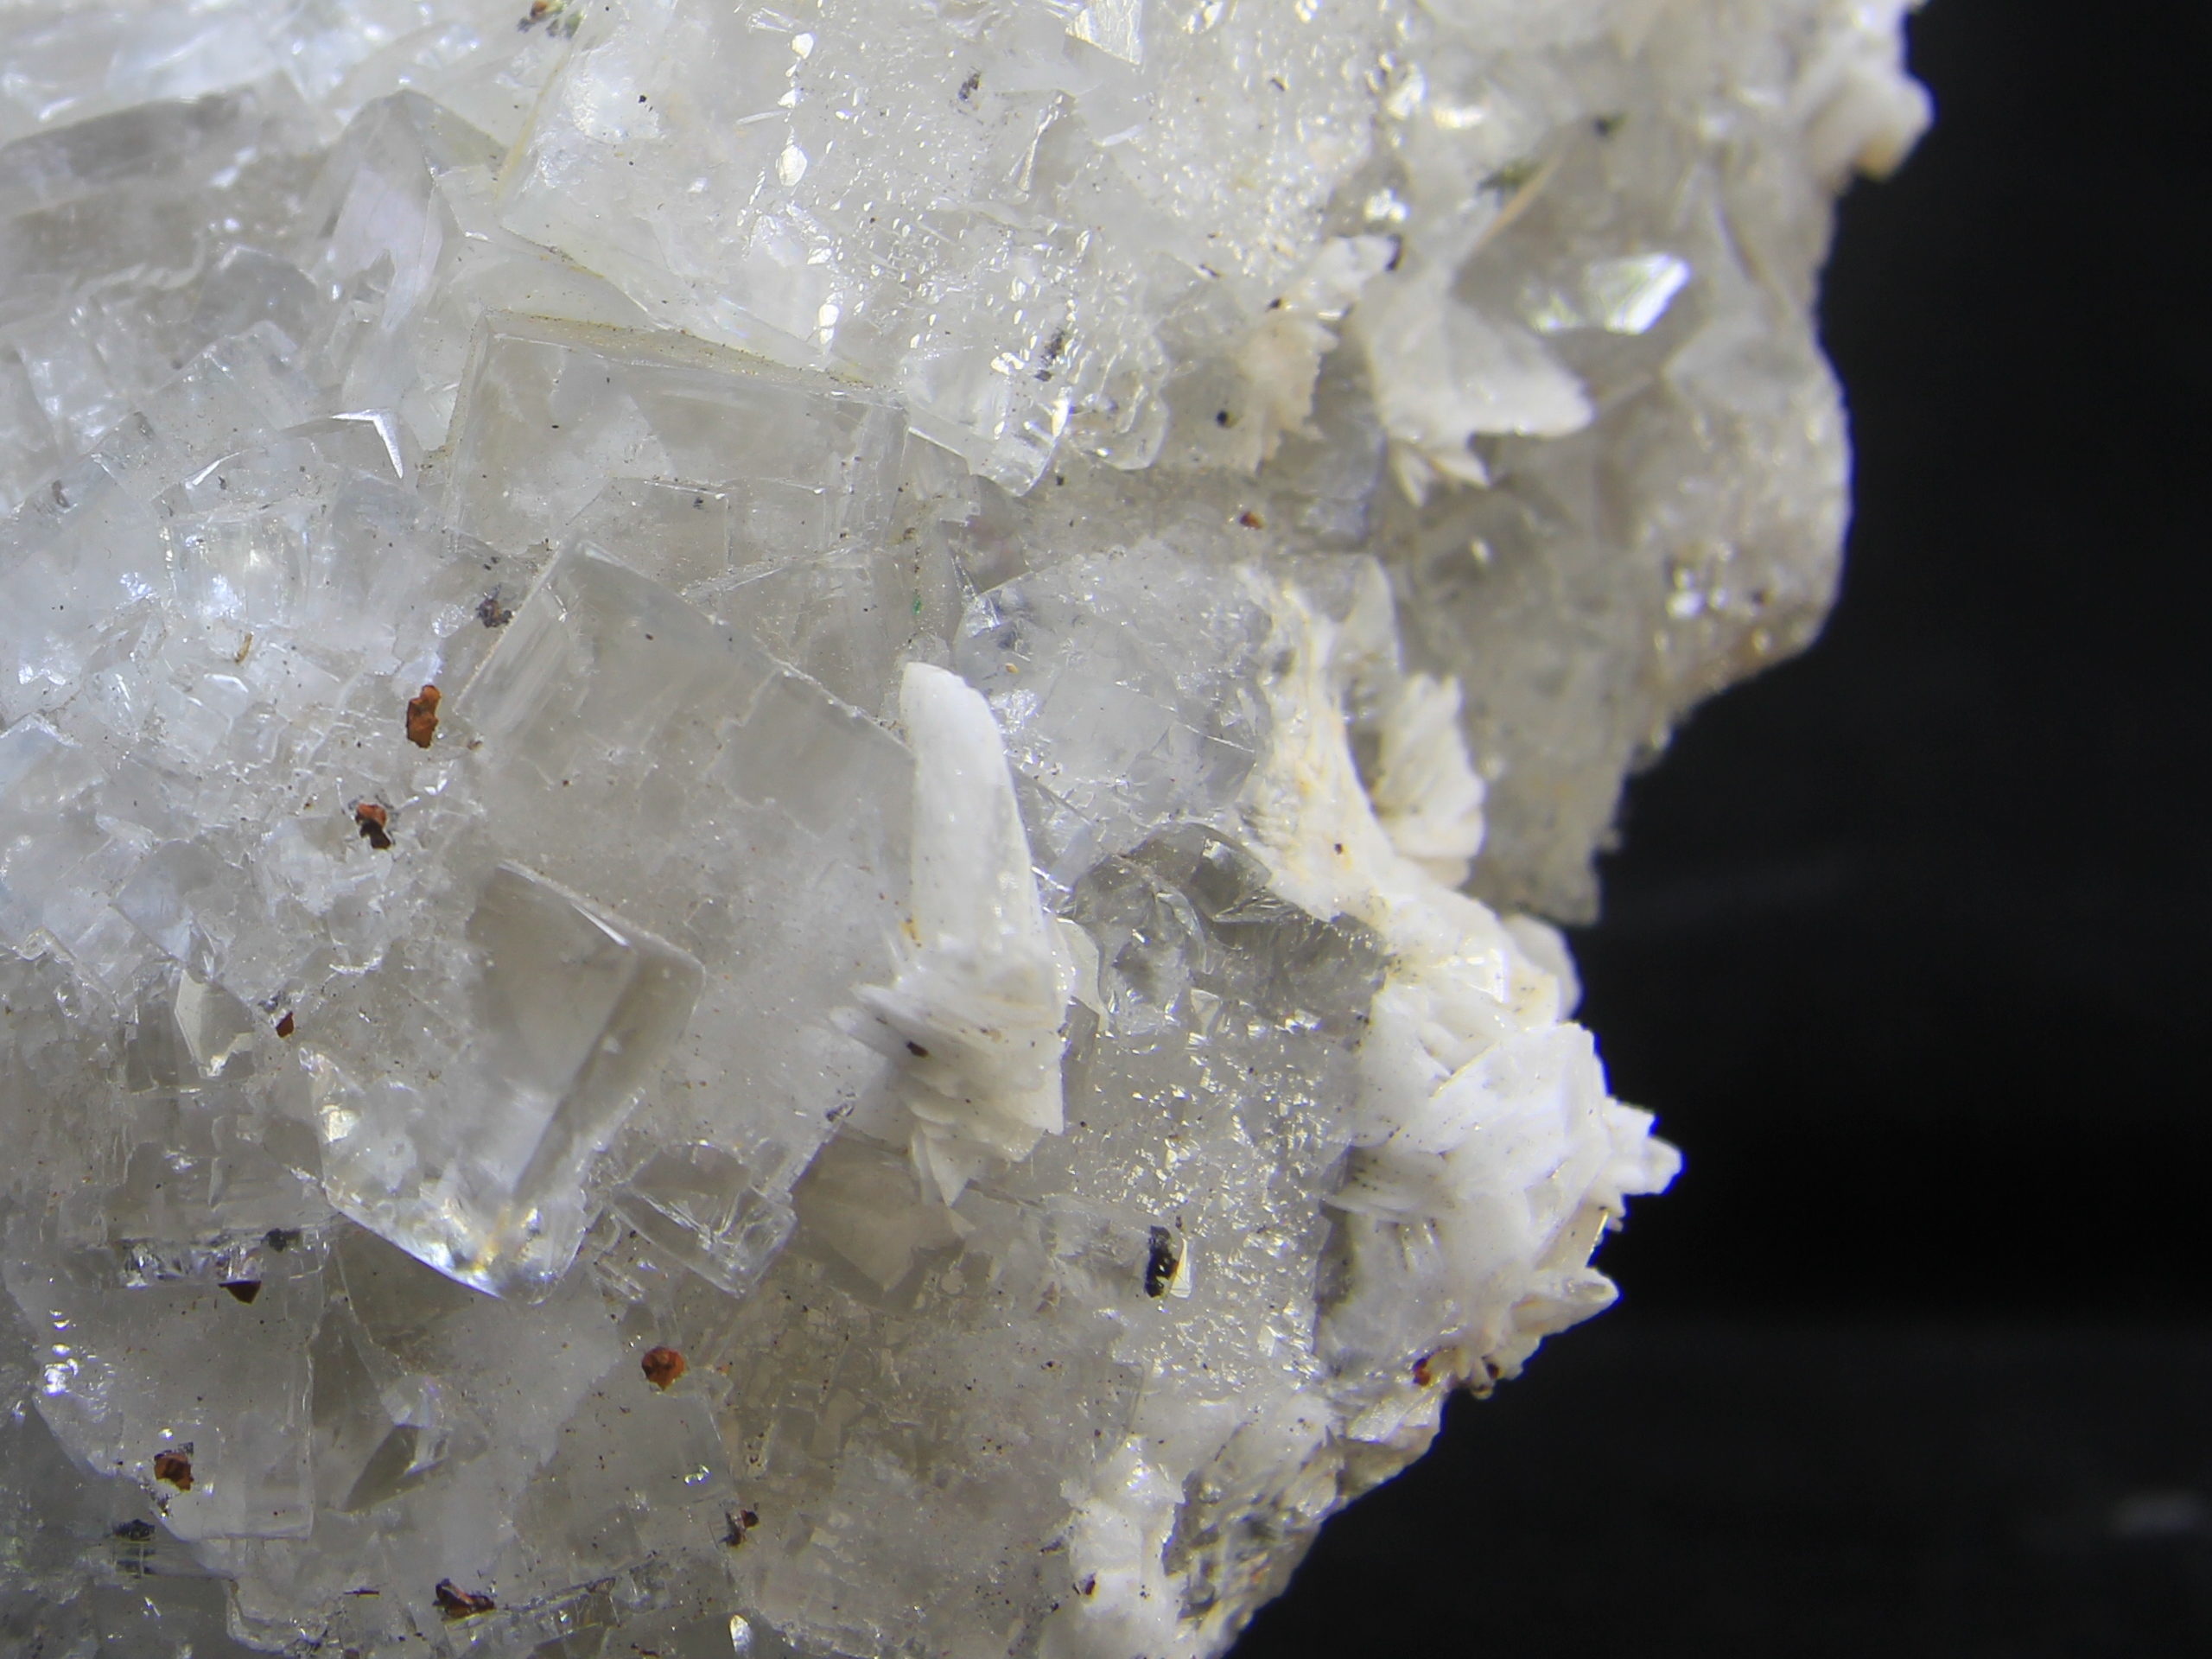 Colourless, partly transparent fluorite